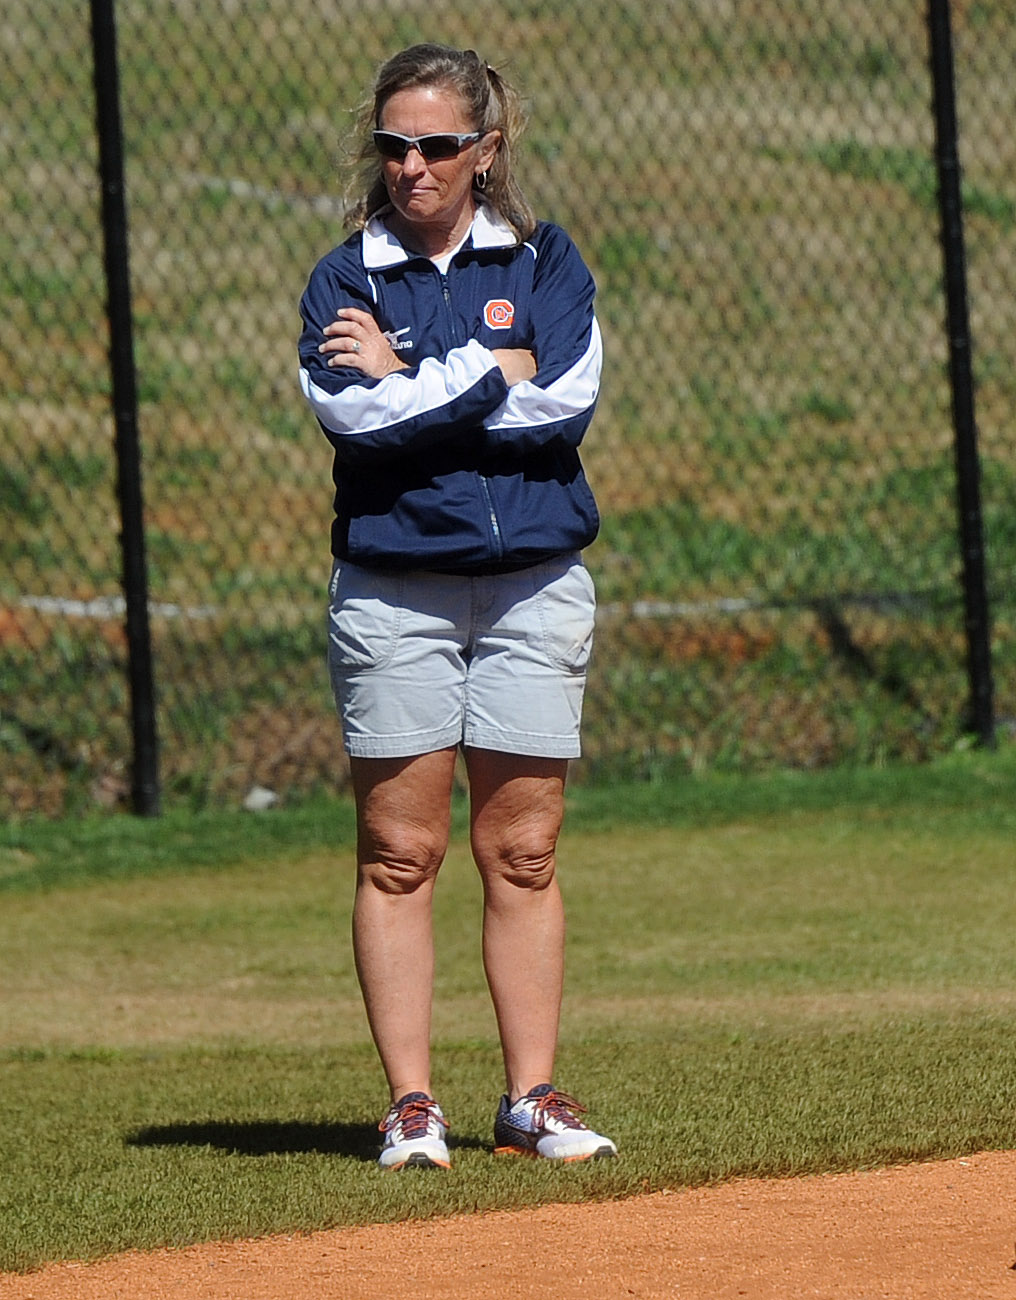 One week left to sign up for Carson-Newman softball's instructional camp